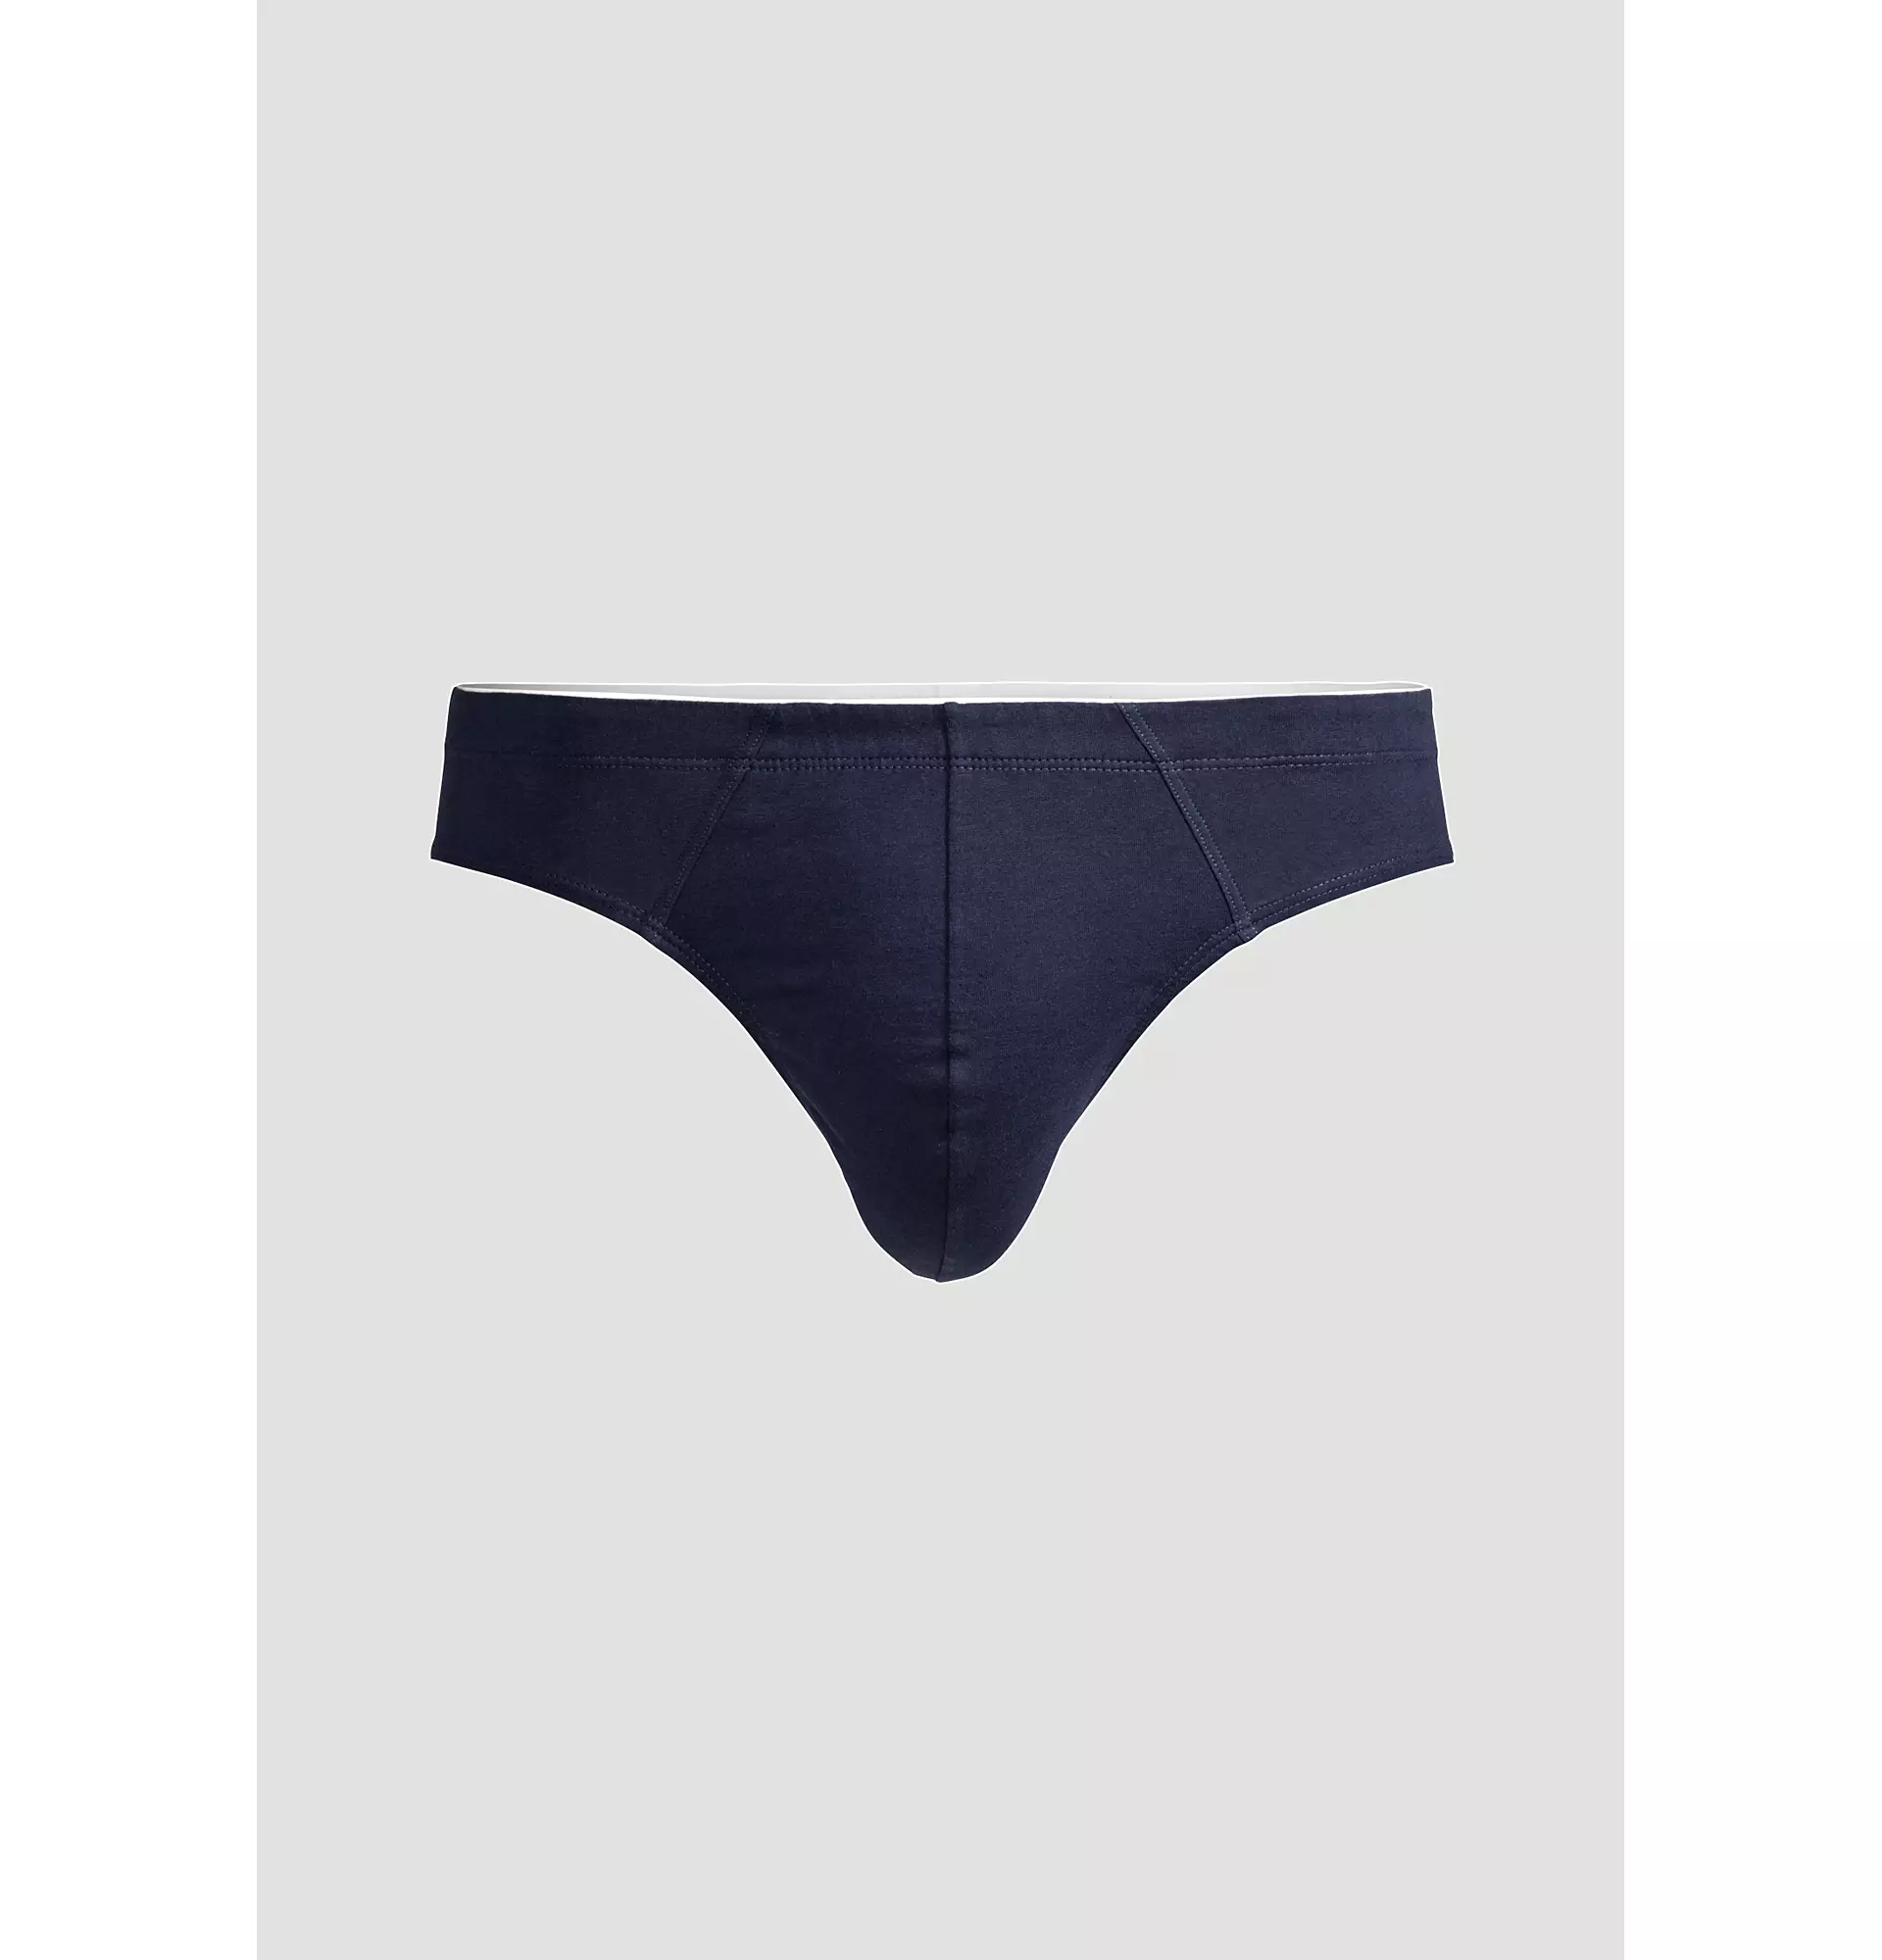 PureLUX briefs in a set of 2 made of organic cotton 44301